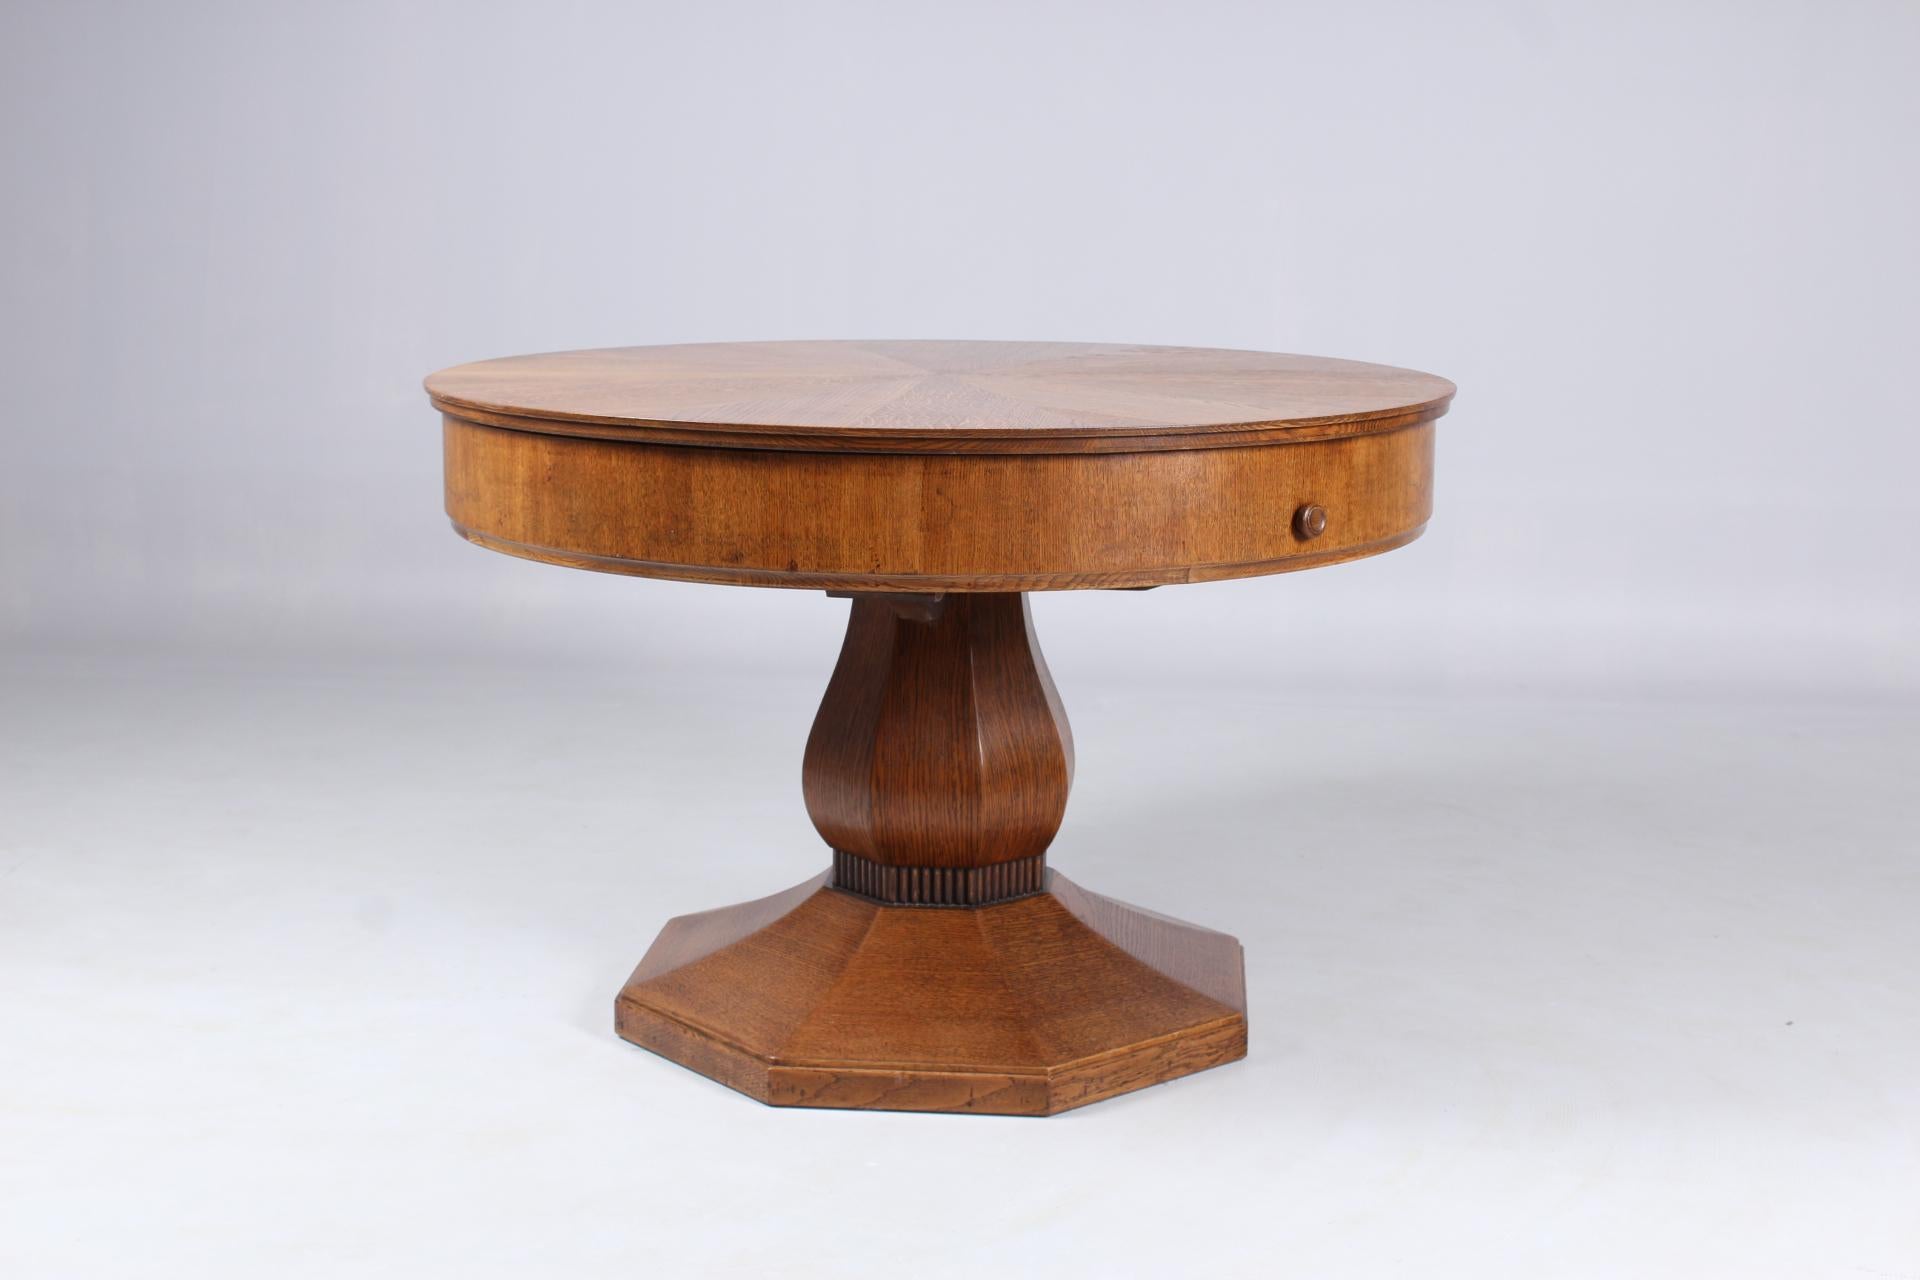 Liegnitzer Ringtisch, Germany 1920s

Oak solid and veneered.
Round table standing on an octagonal curved central base with a special and absolutely rare enlarging mechanism.
Design by Josef Seiler from 1918, patent pending in 1920.
The frame of